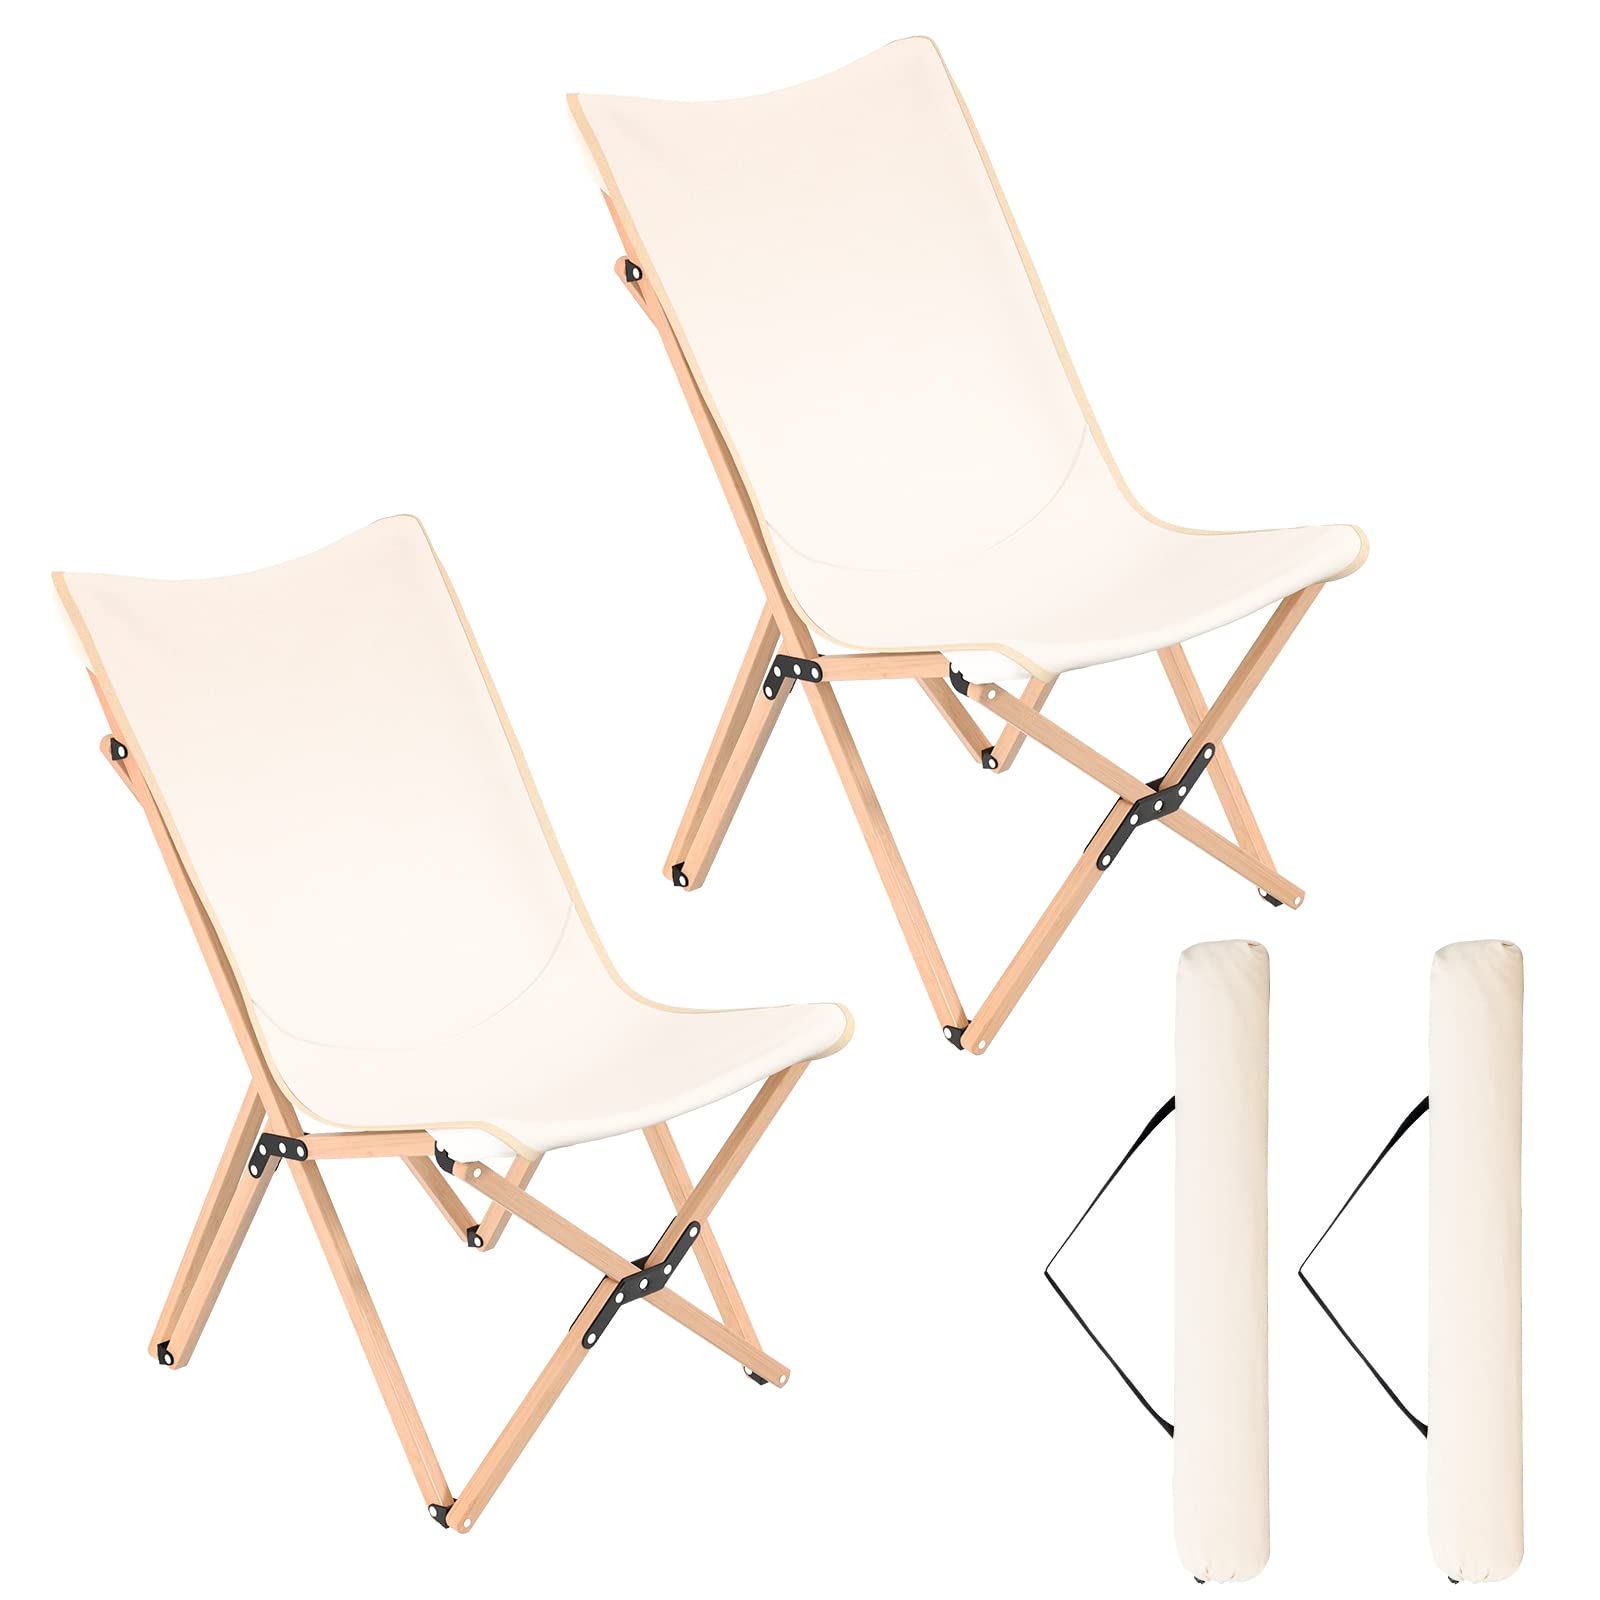 Camping Chairs 2 Pack - Giantex